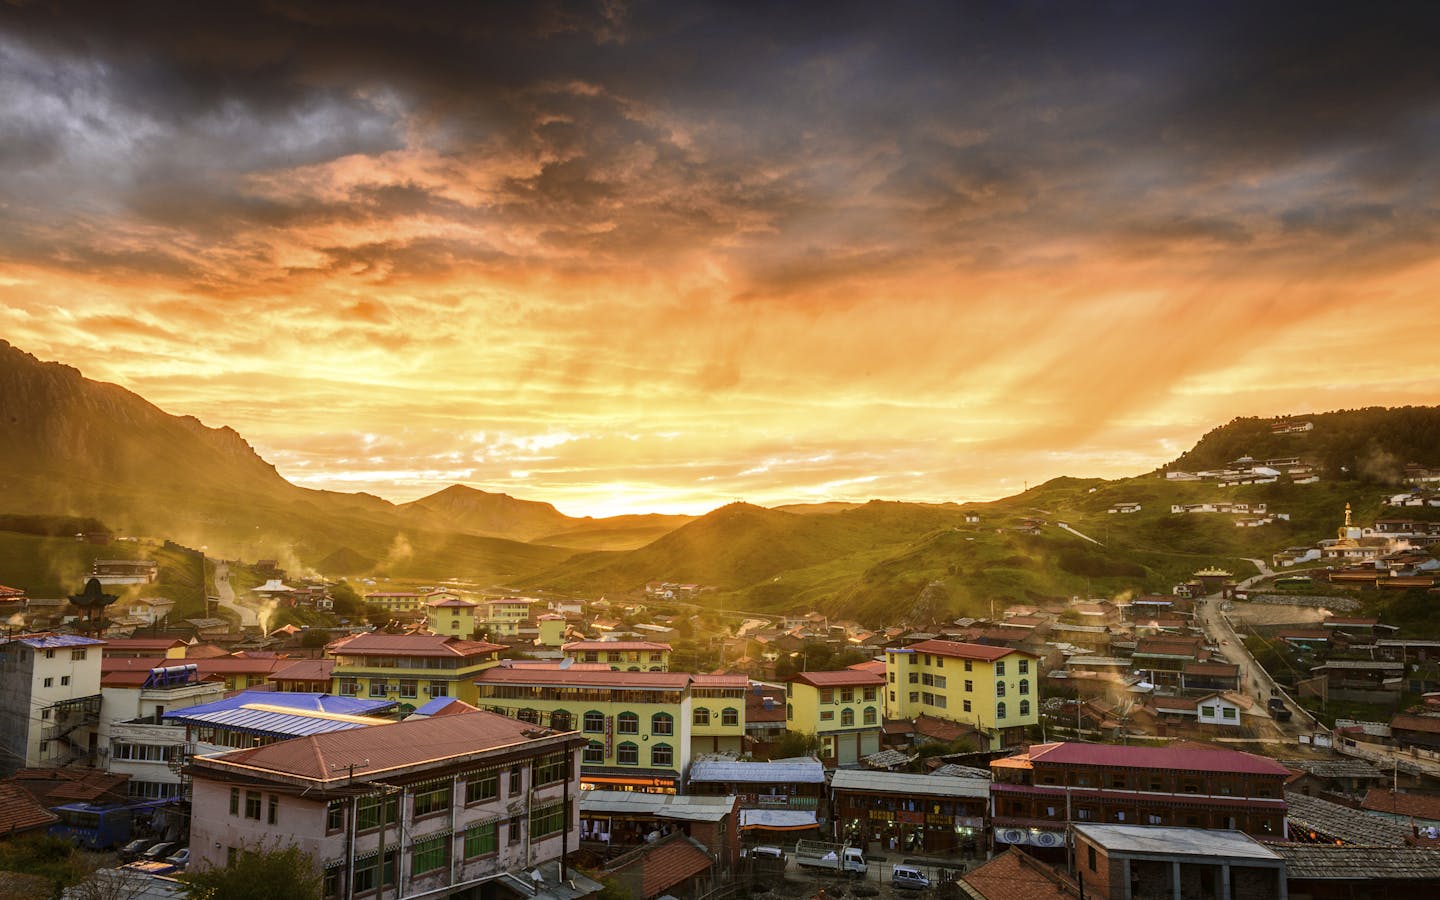 Skyline of a small rural town with rolling hills in Tibet during sunset.